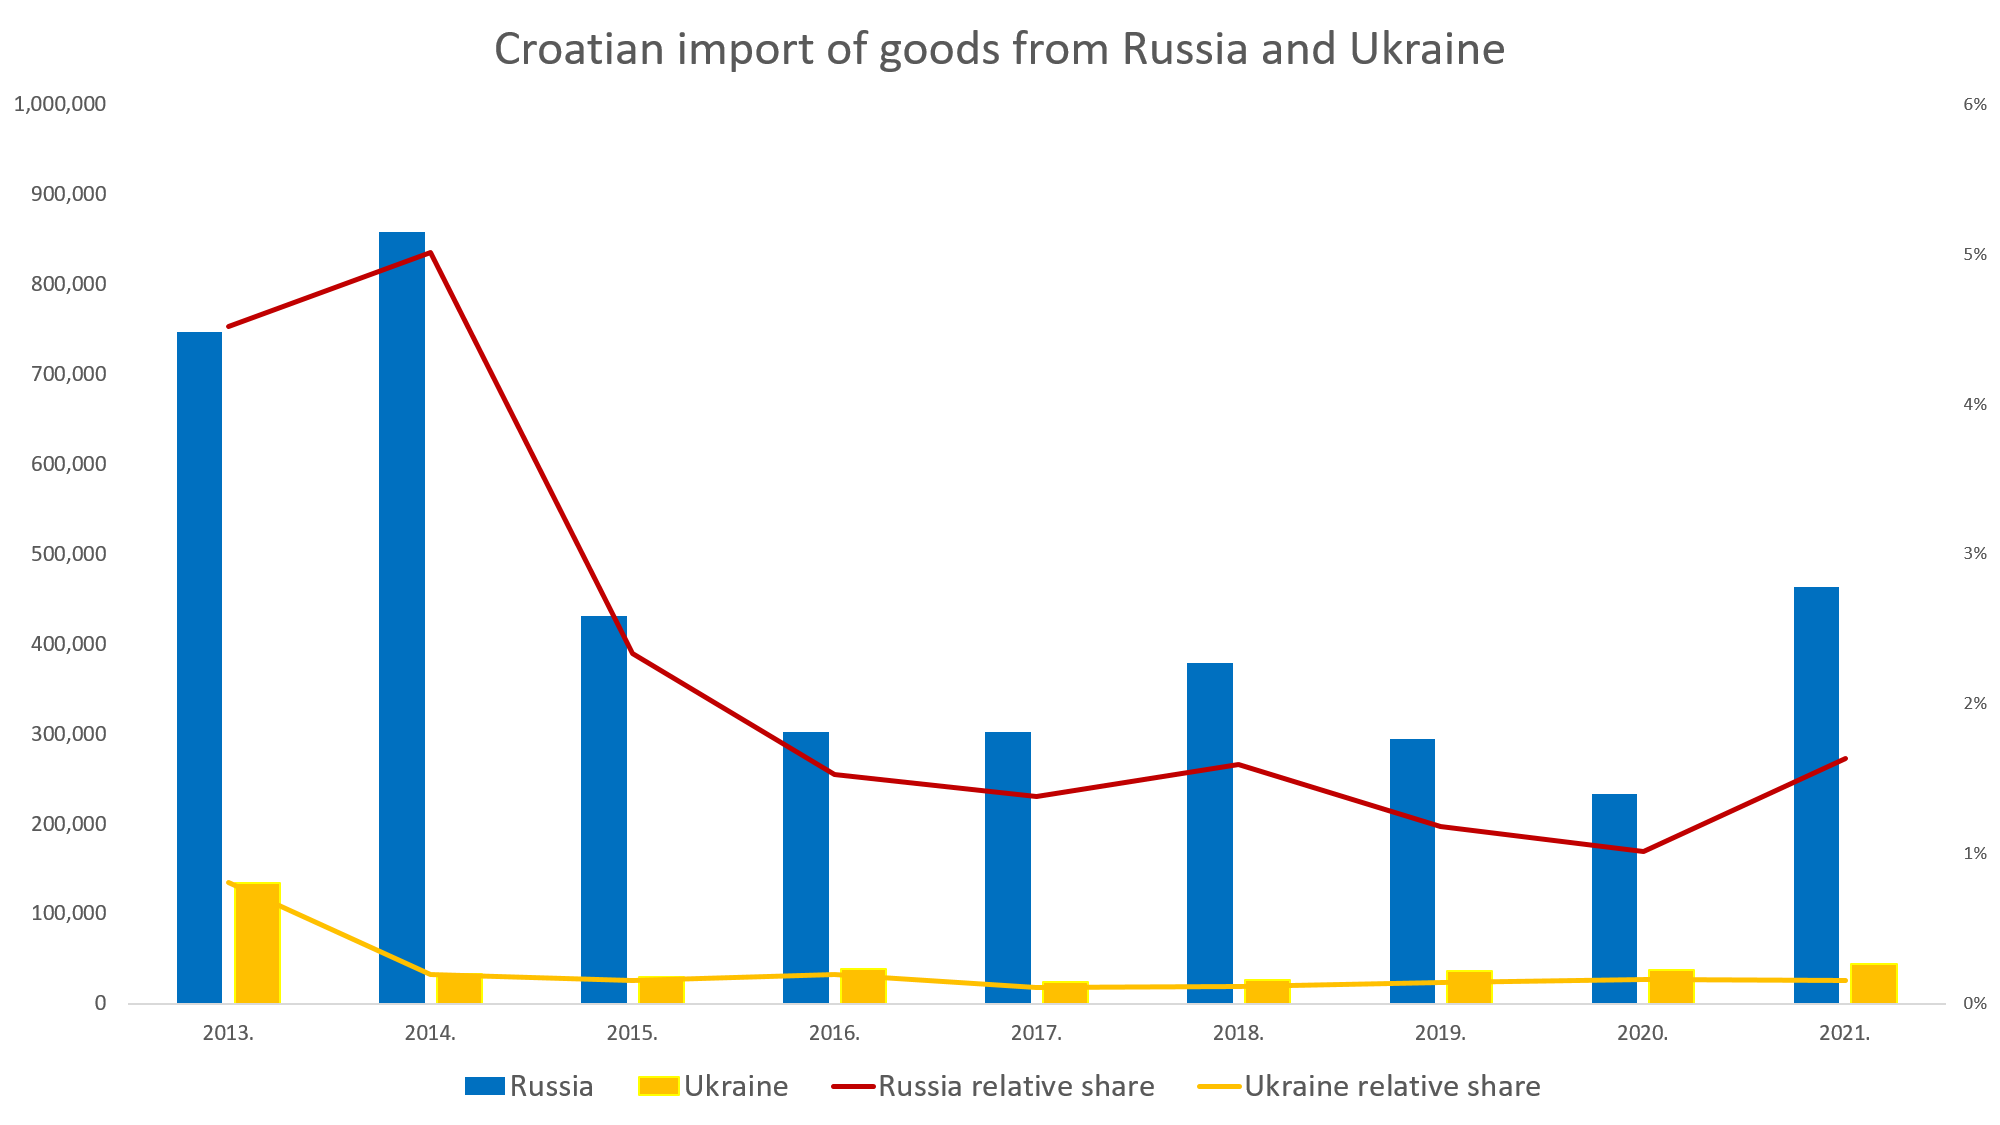 Croatian-foreign-frade-of-goods-with-russia-and-ukraine-5.png